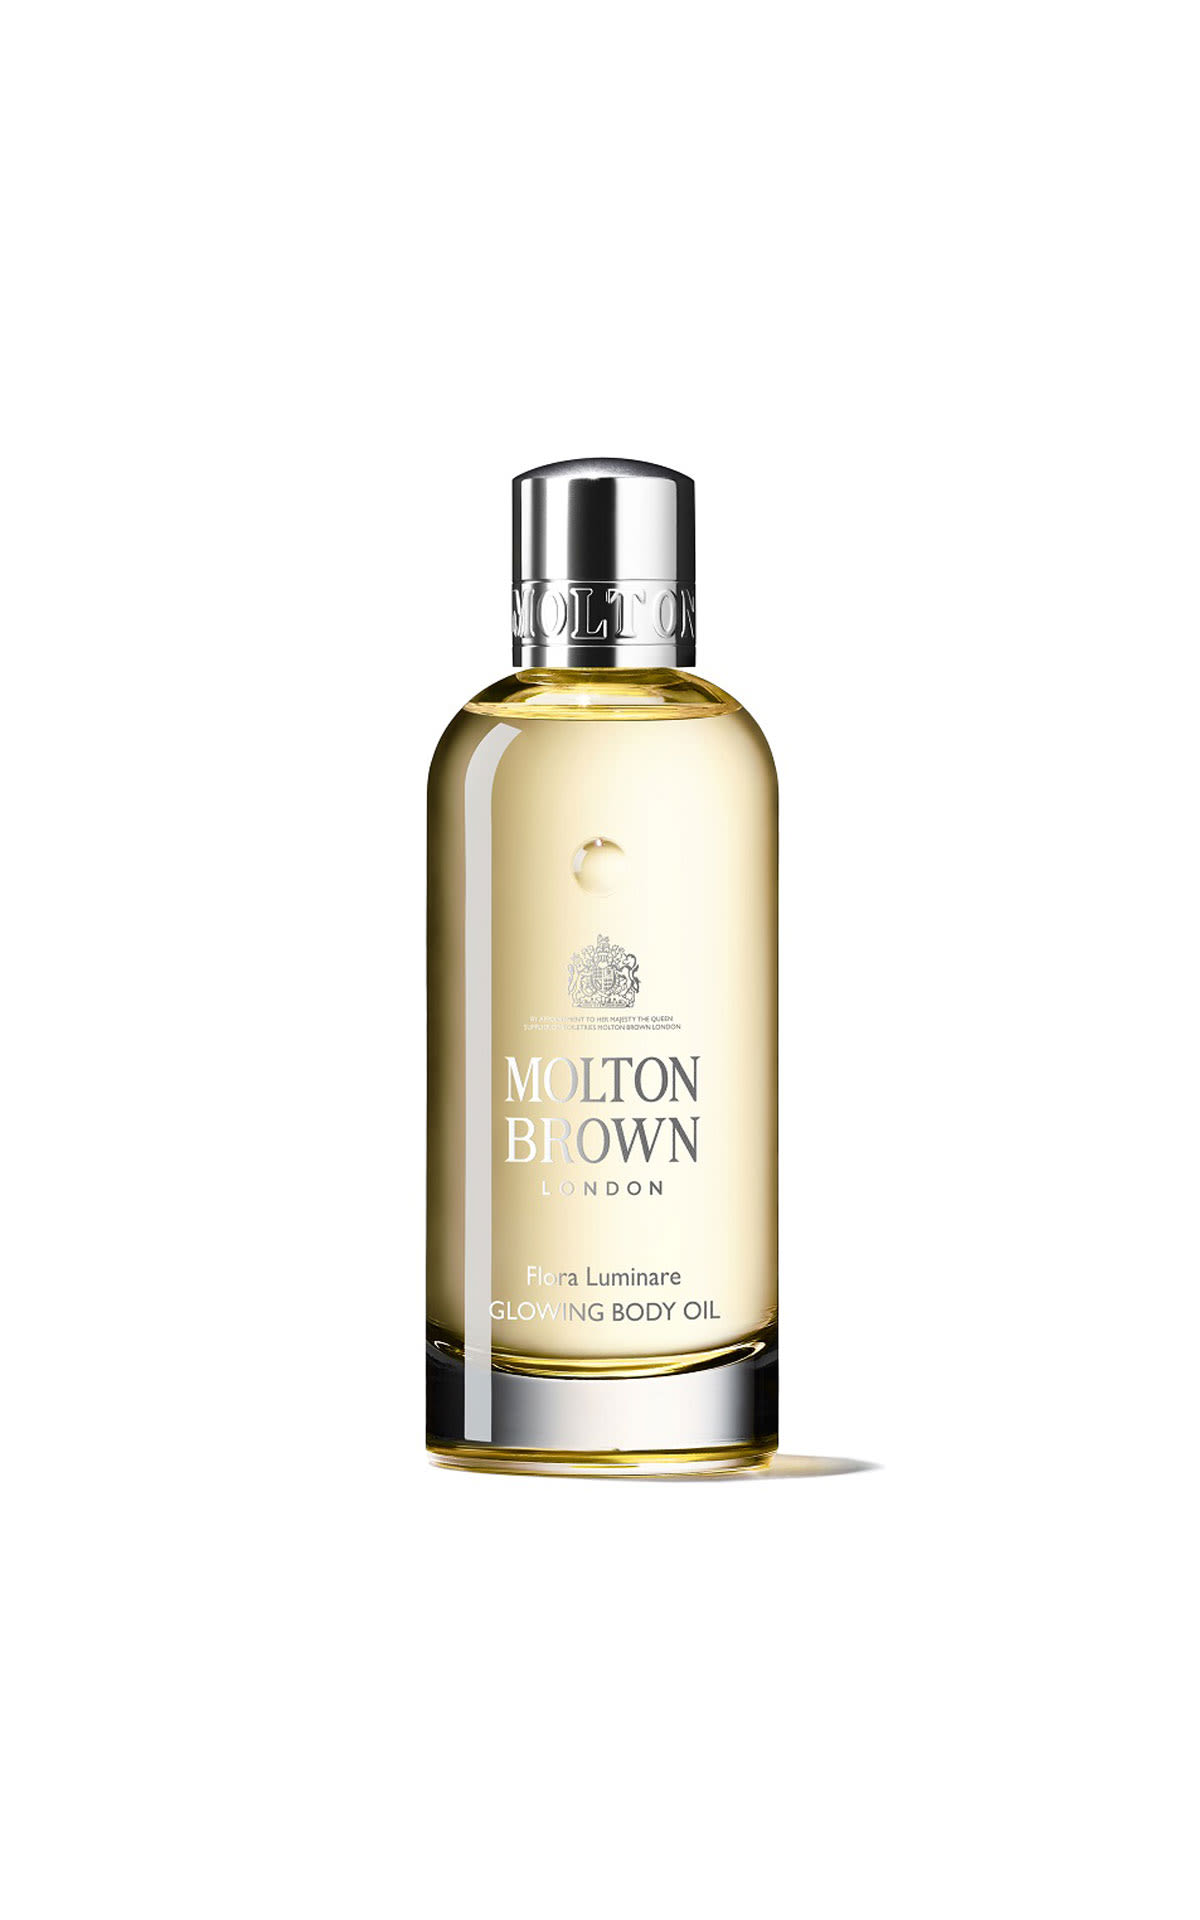 Molton Brown 100ml body oil floral luminare from Bicester Village